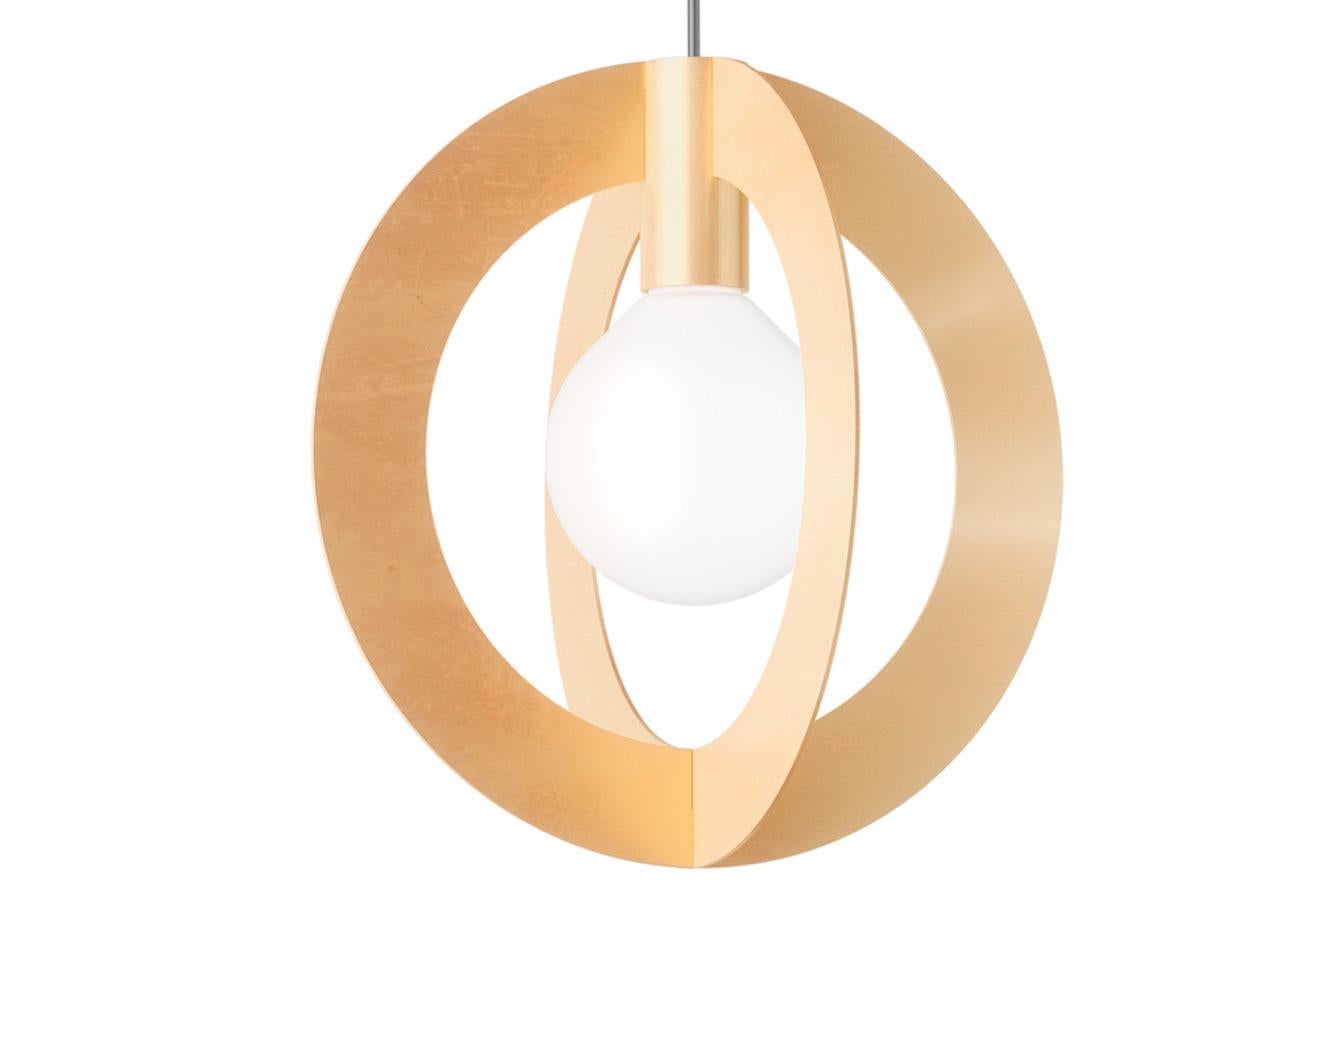 Diaradius 40 or 34 are Minimalist pendant lamps designed by Wishnya Design Studio.
Brass finish. 

Measures: D 40cm or D 34 cm
LED G9 60W 220V - US compatible
Dimmable
Adjustable wire

Two sizes available 
Two finishes available: copper,